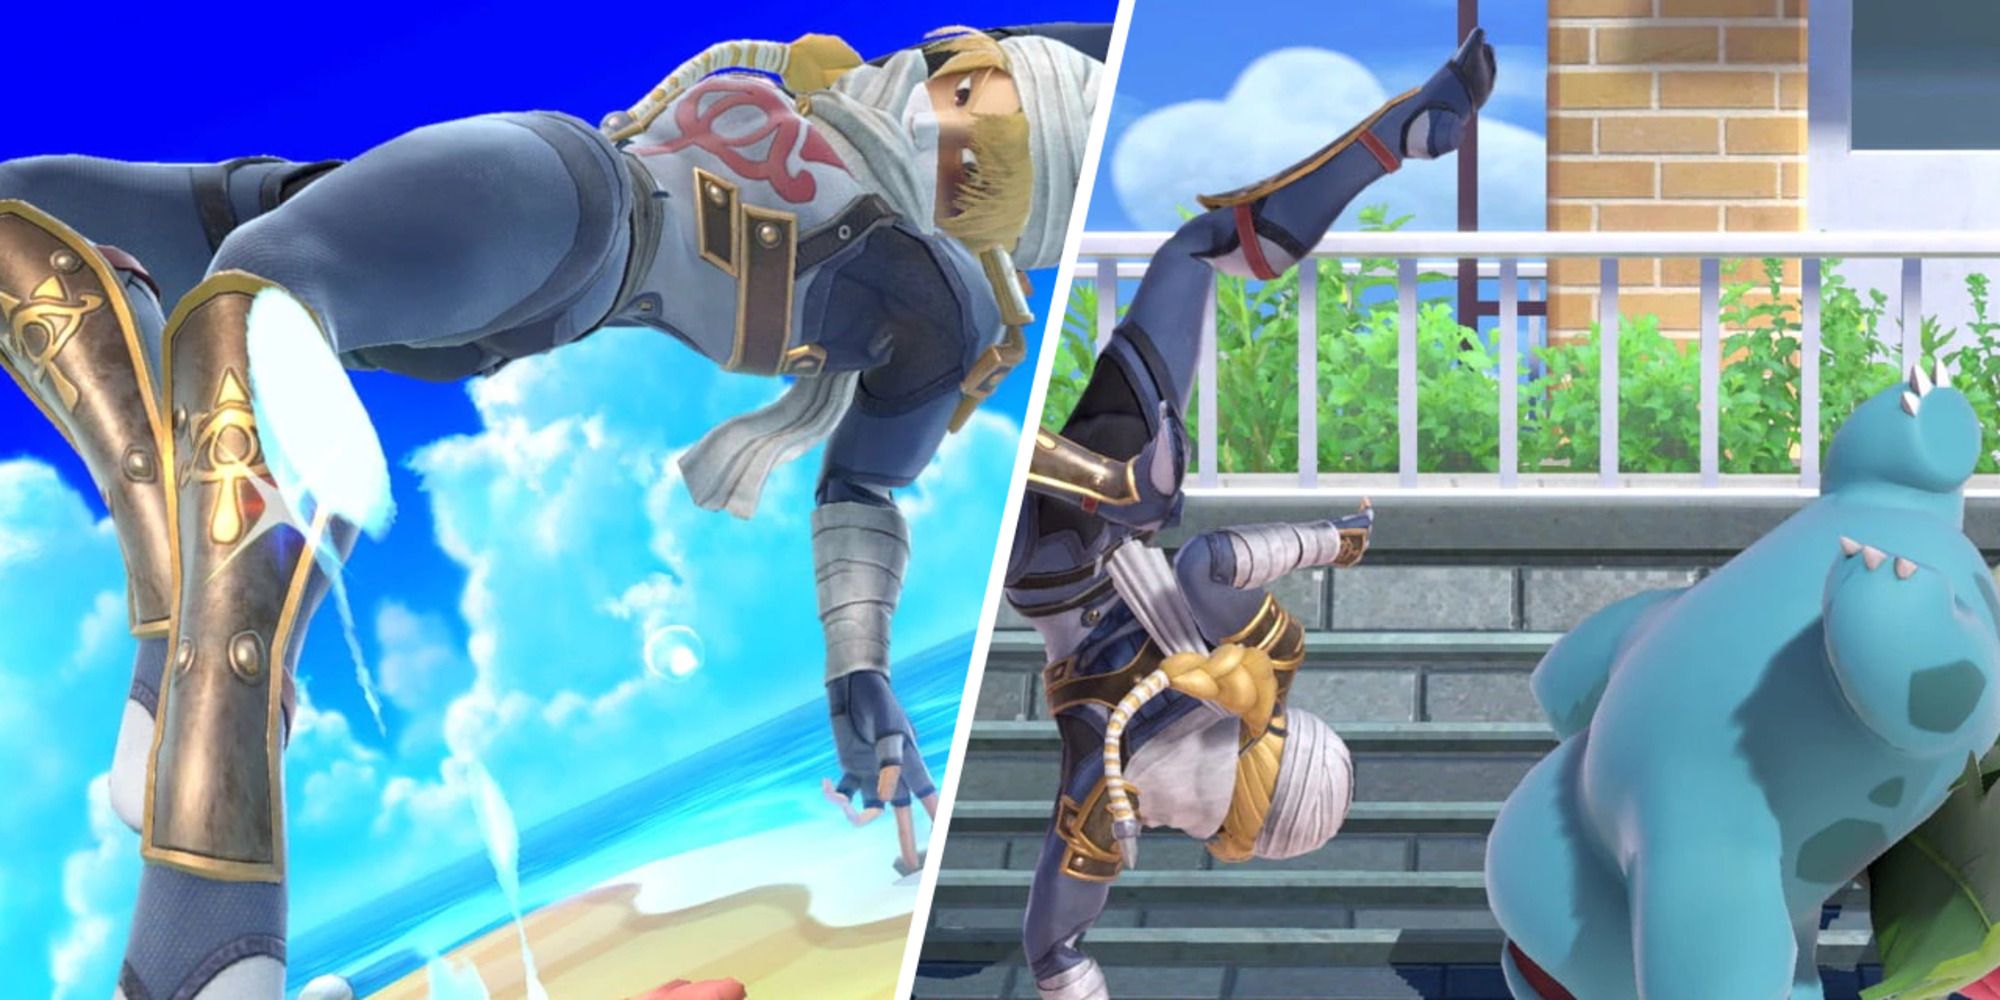 Sheik using her Side-B on the left and one of her taunts on the right along with Ivysaur in Super Smash Bros. Ultimate.